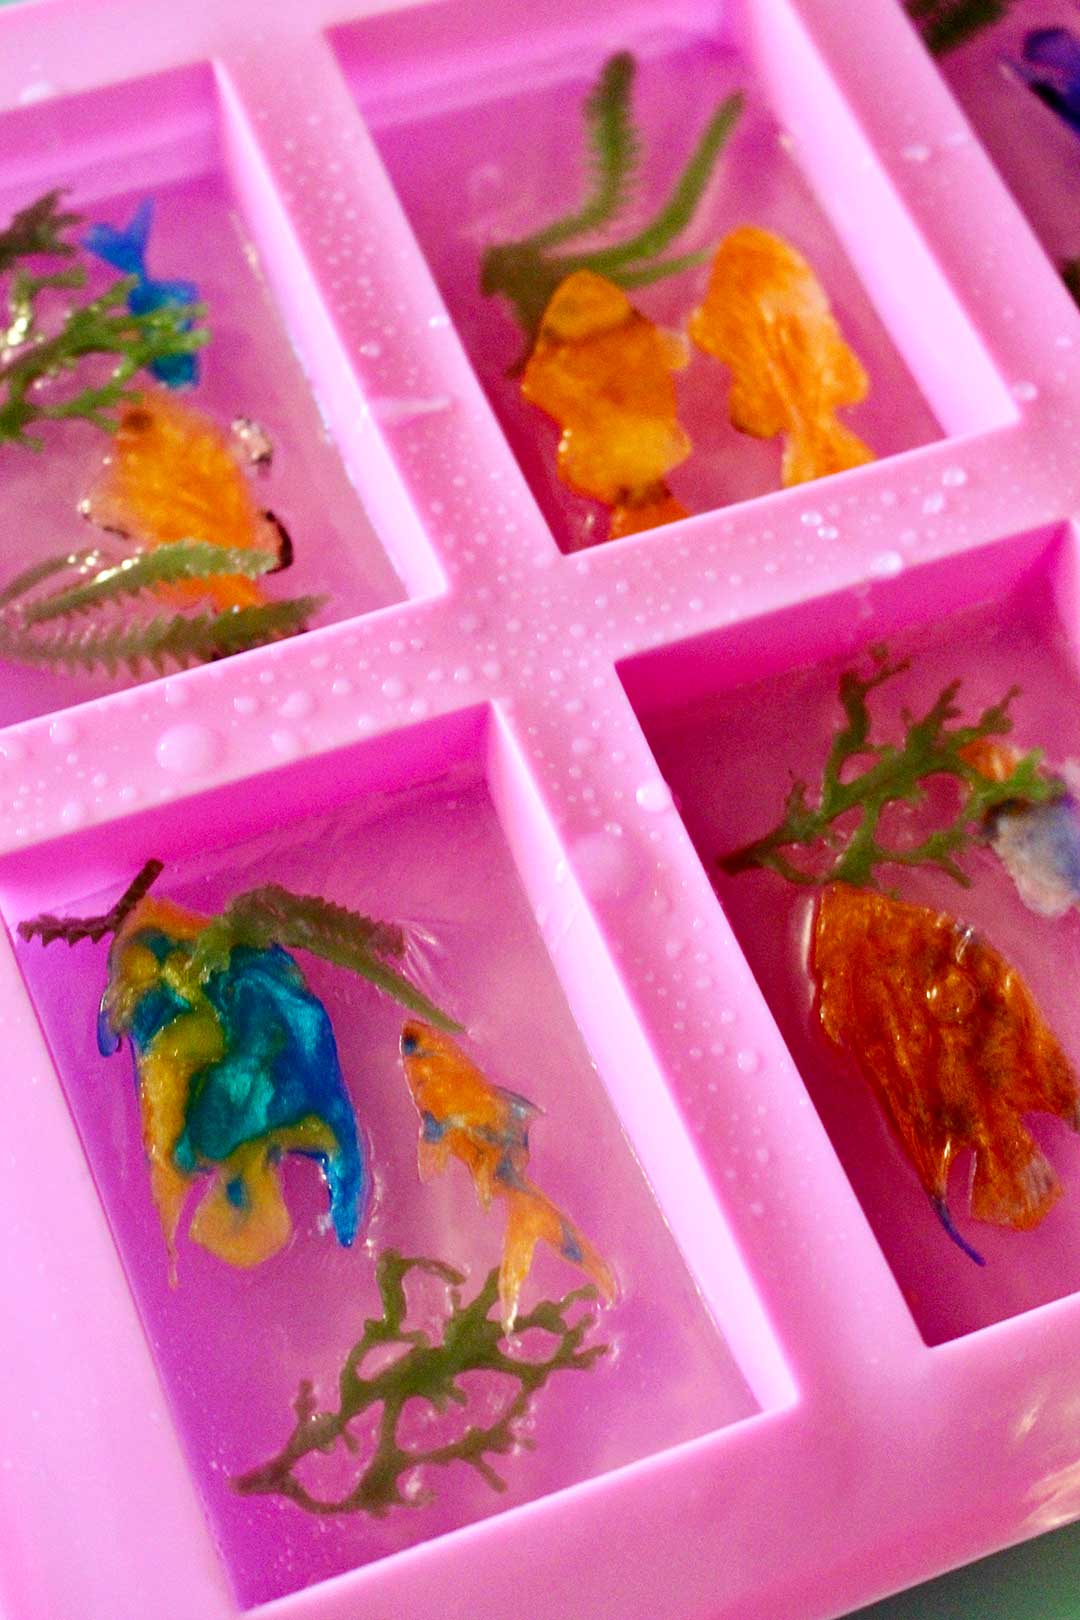 Close up view of clear soap layer and tropical fish in soap mold.